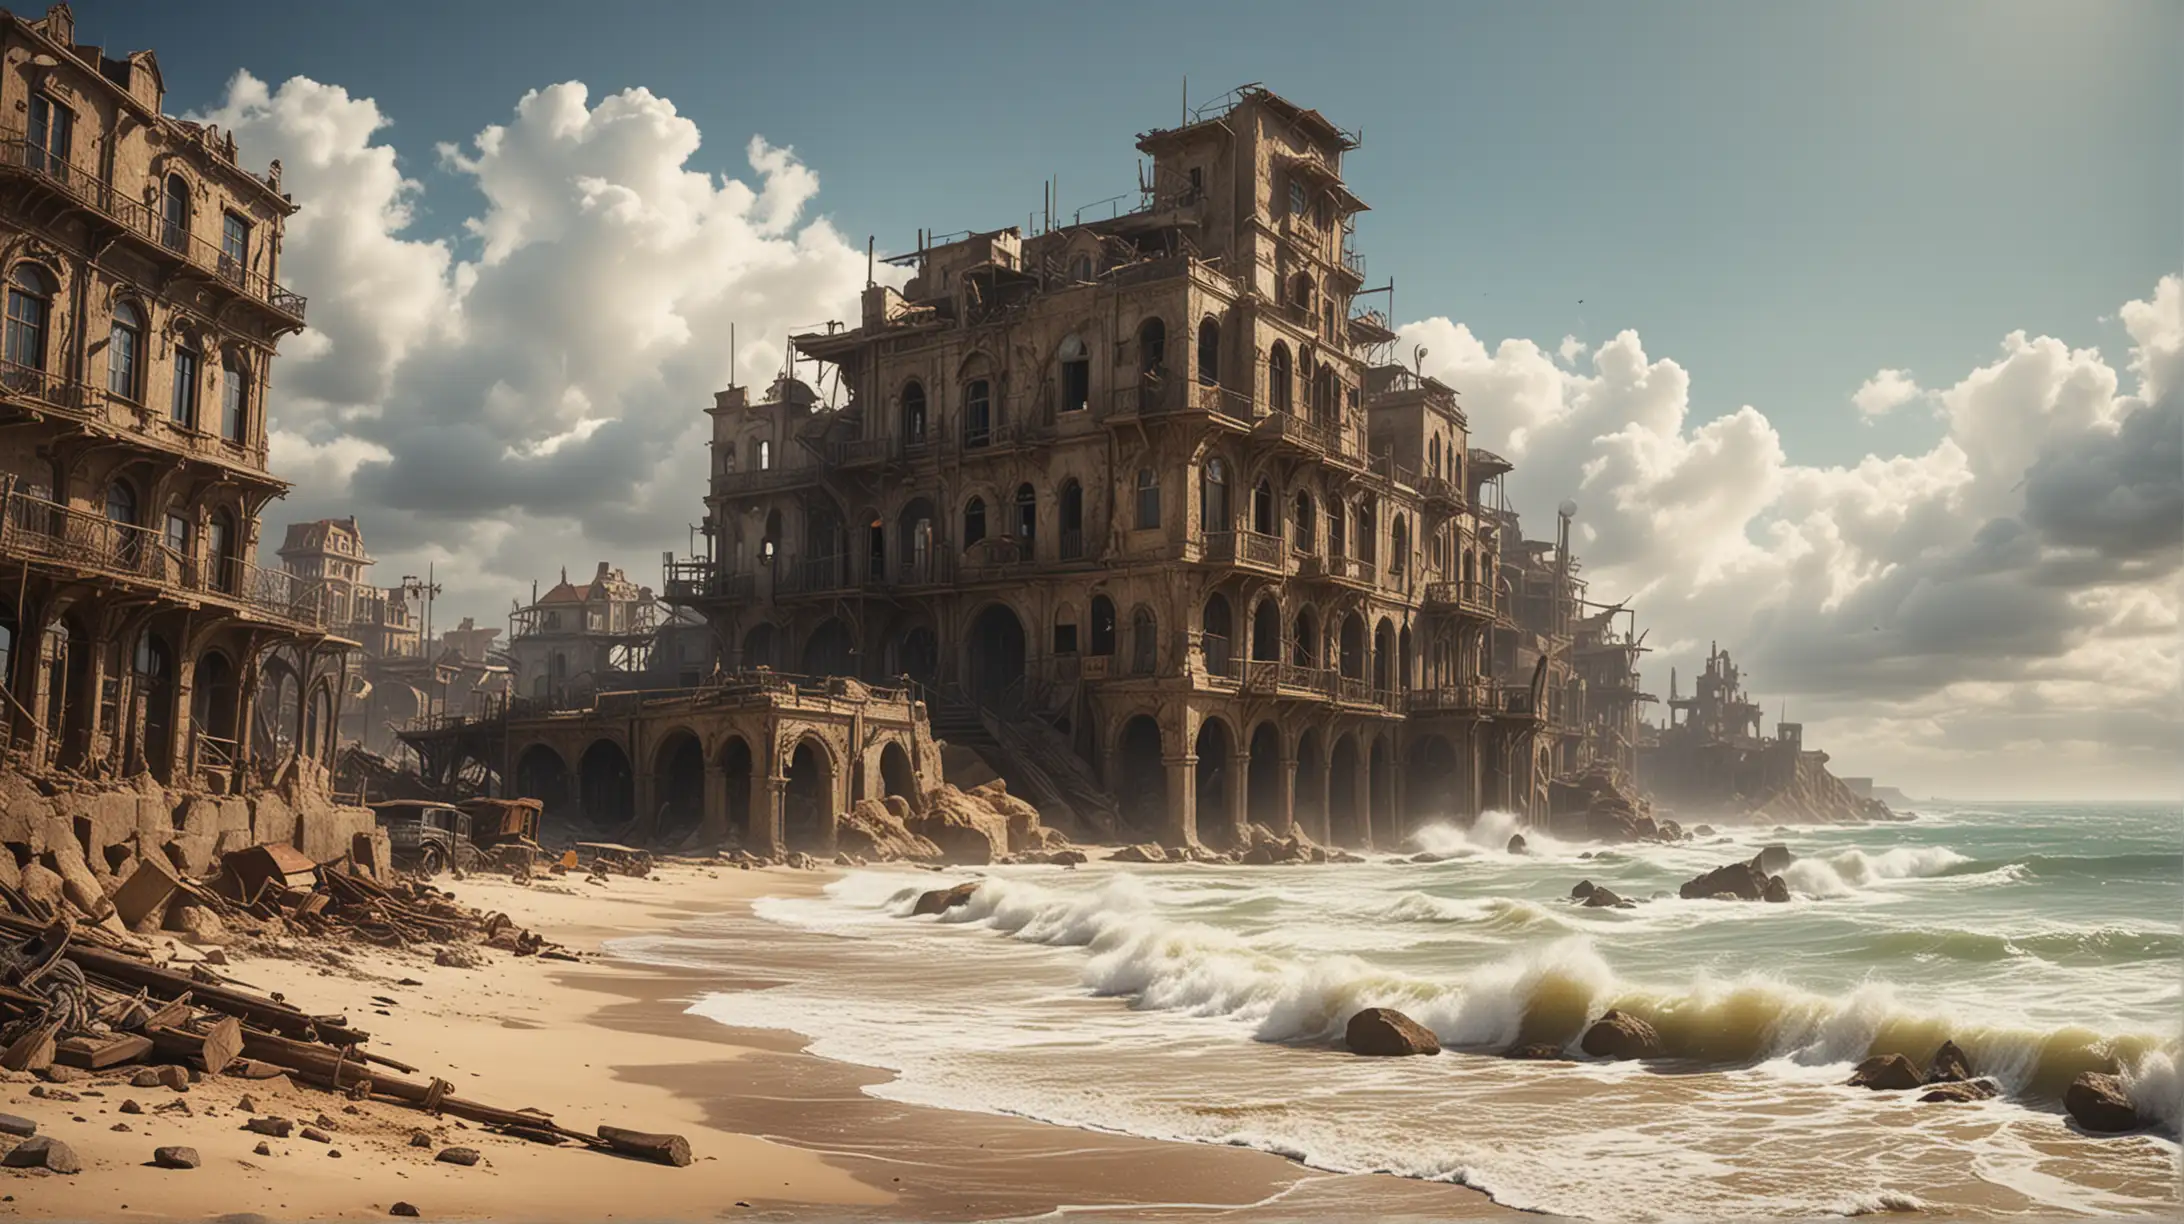 Steampunk City Ruins by the Sea Amidst High Waves and Strong Wind